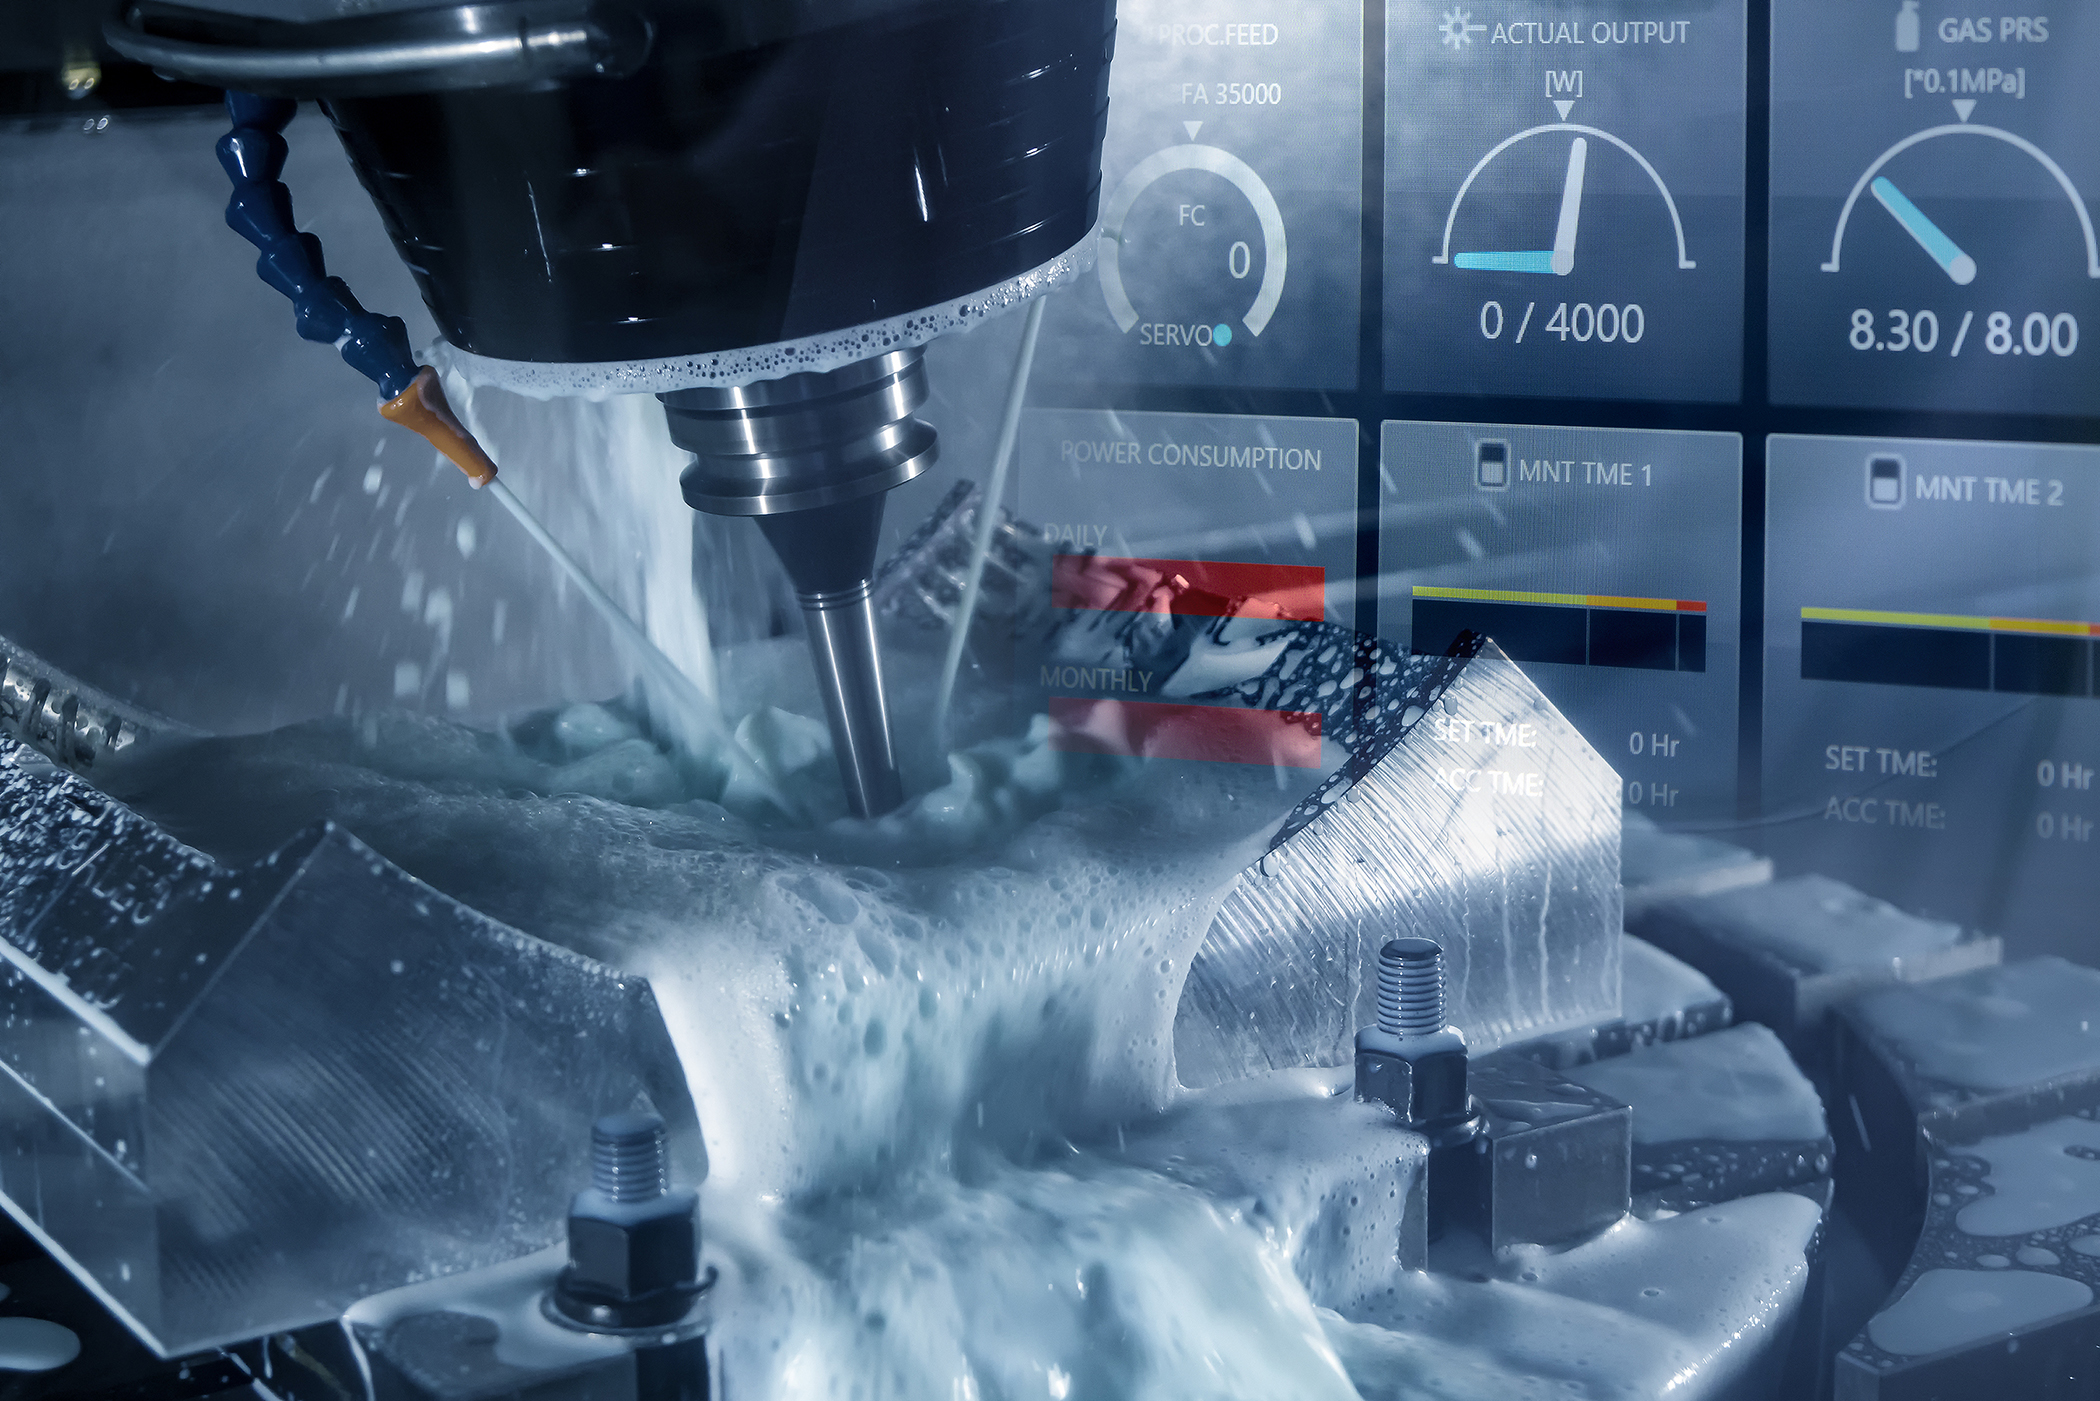 The abstracts scene of 5-axis CNC milling machine and monitor gauge  cutting the tire mold parts  by solid ball endmill tools